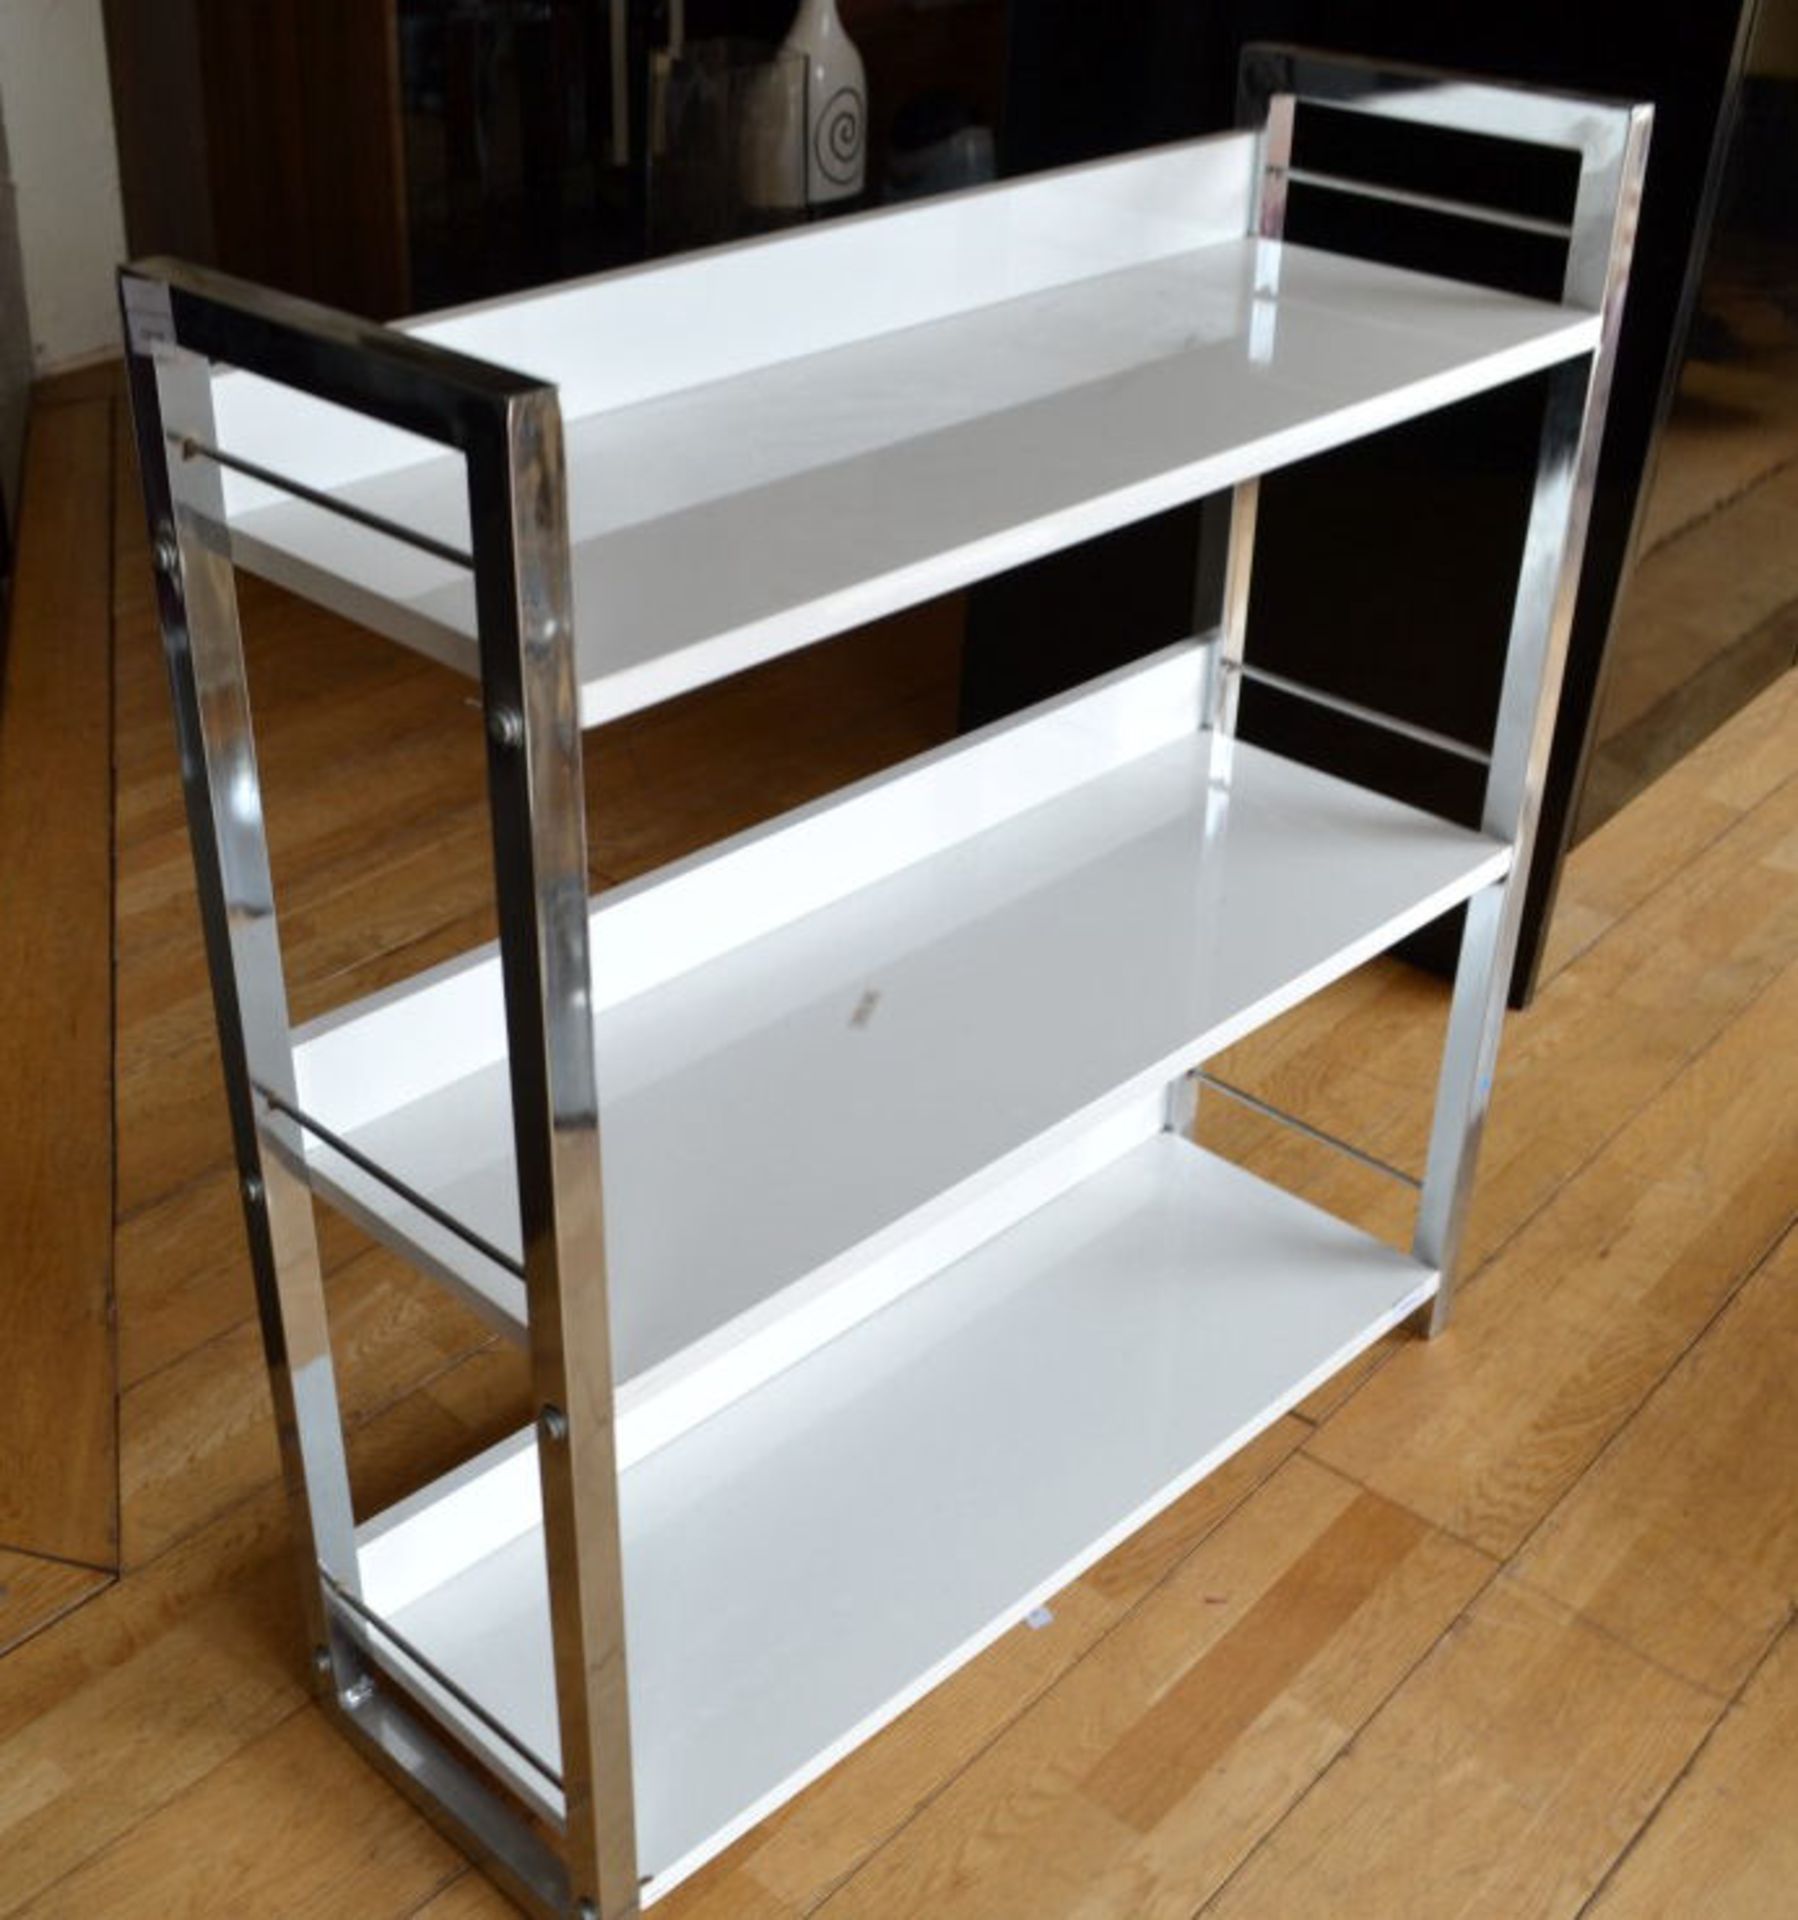 1 x Modern White And Silver 3 Tier Shelf Unit - Image 2 of 5